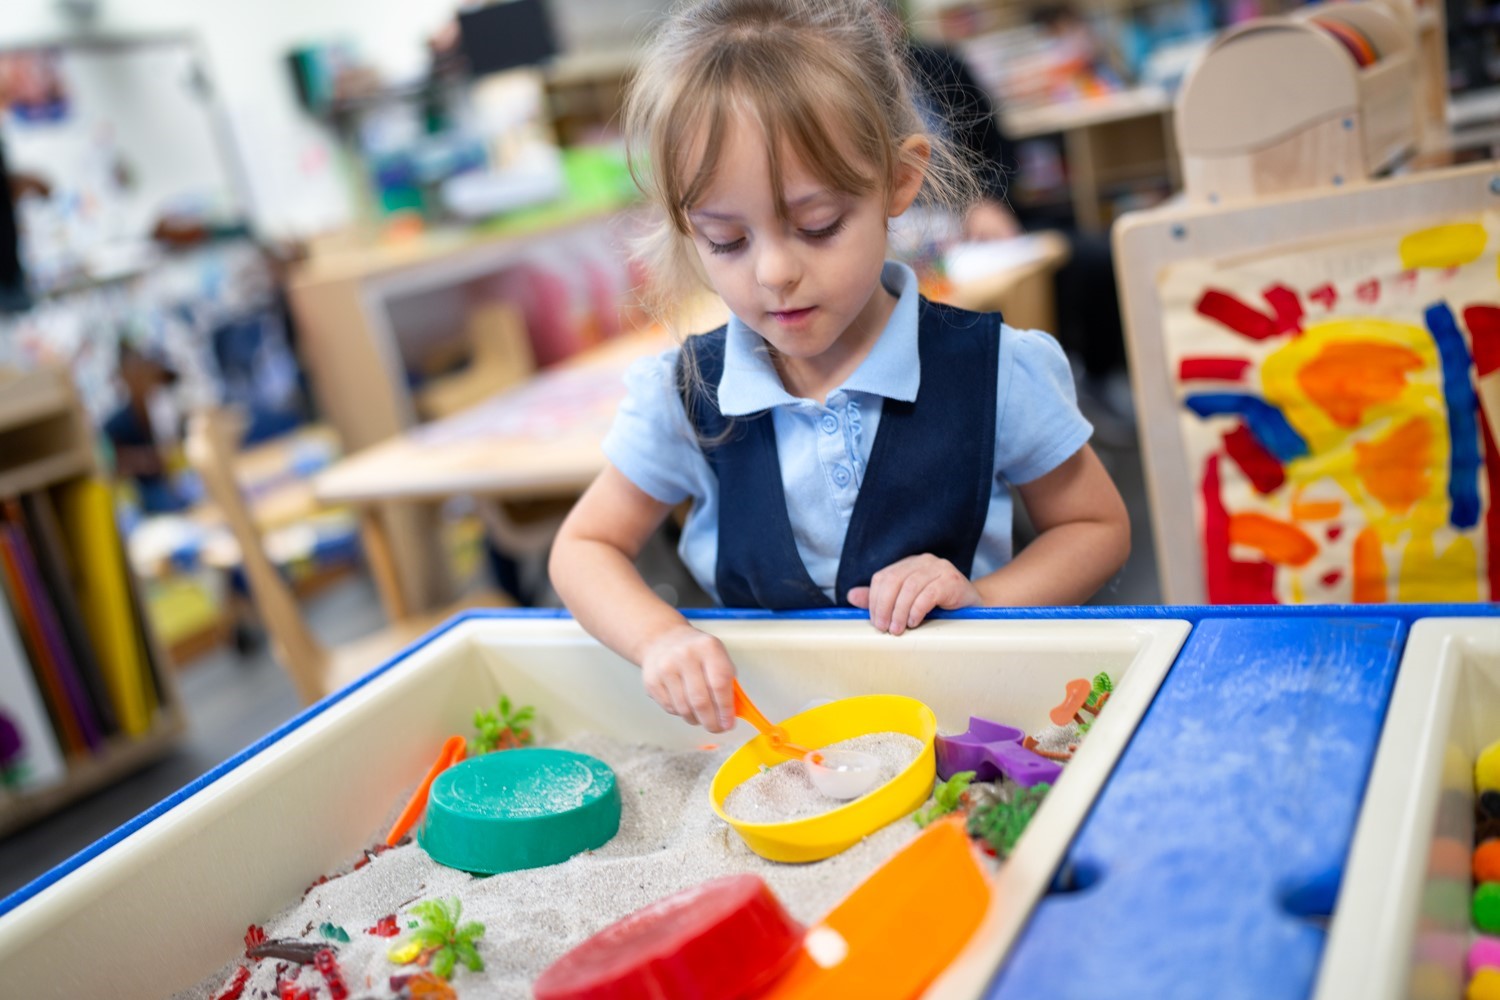 A young girl plays with toys in a sandbox located in a clean and engaging pre-K classroom.